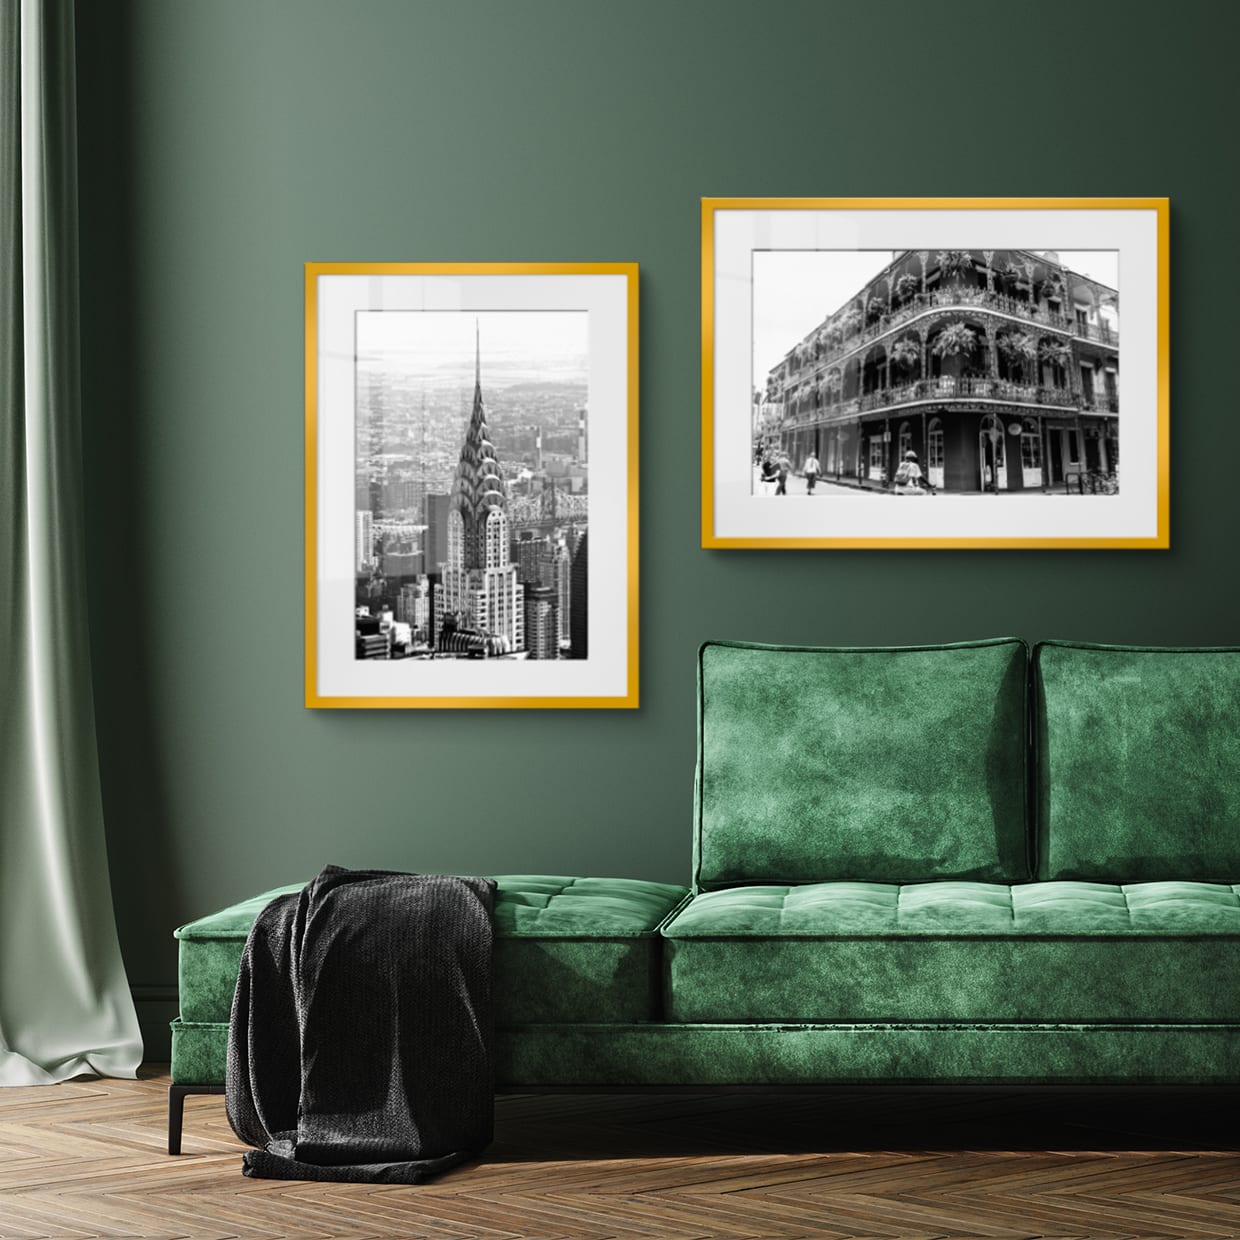 Framed Print - Framed Print with Your Own Photo! As Easy As That